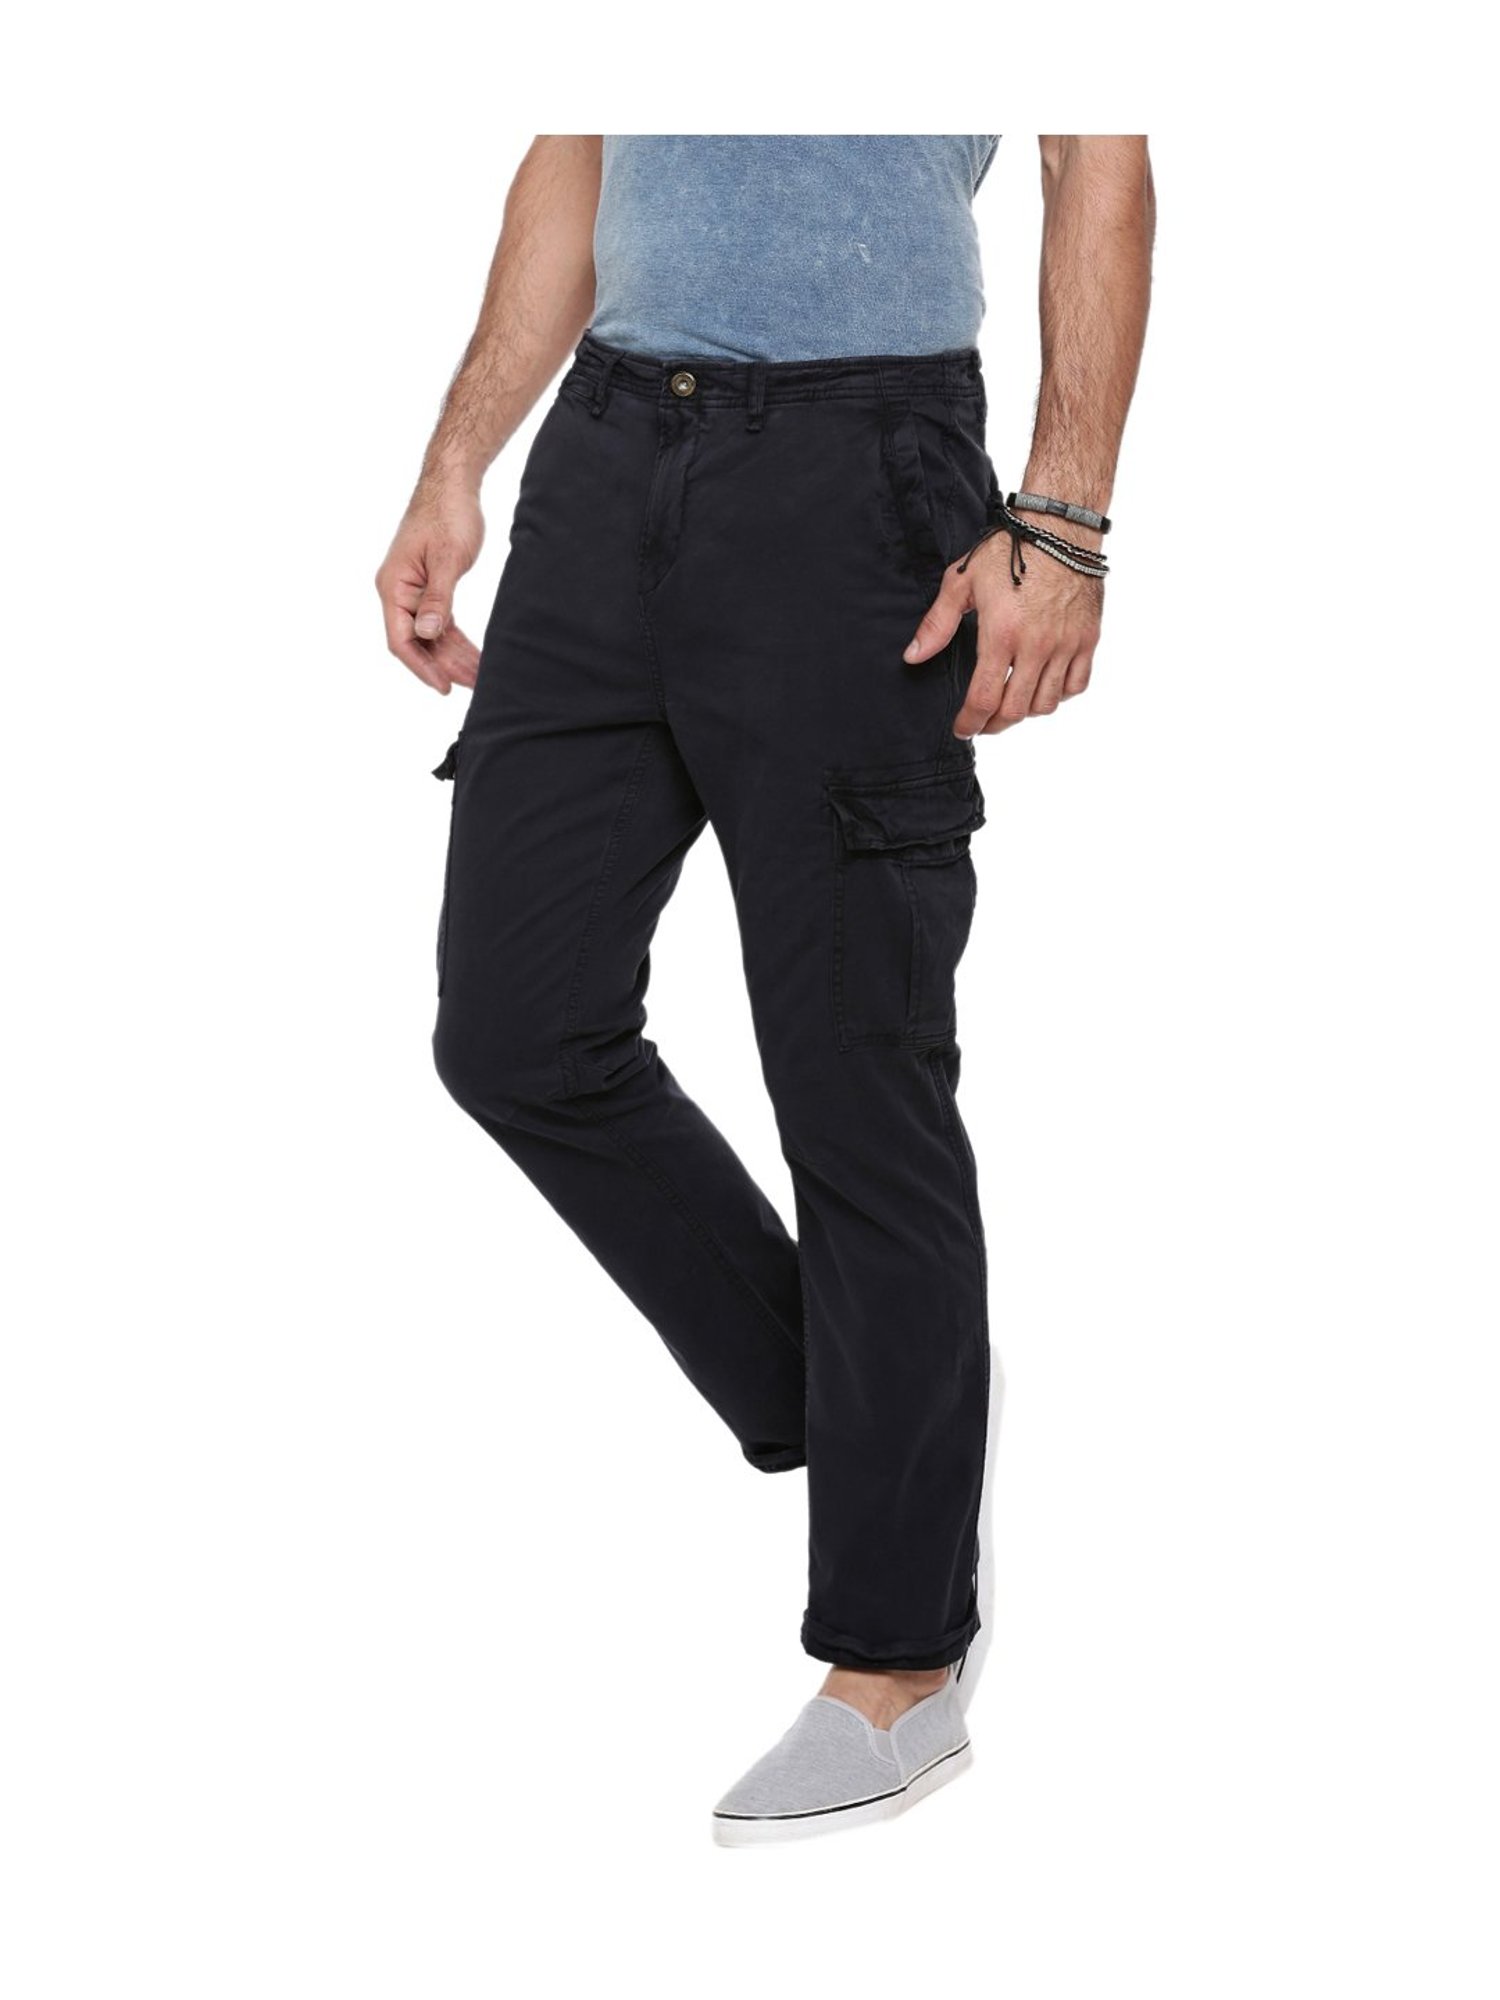 Buy Hubberholme Mens Cotton Slim Fit Solid Cargos Casual Trousers with  Cargo Pockets Black 30 at Amazonin